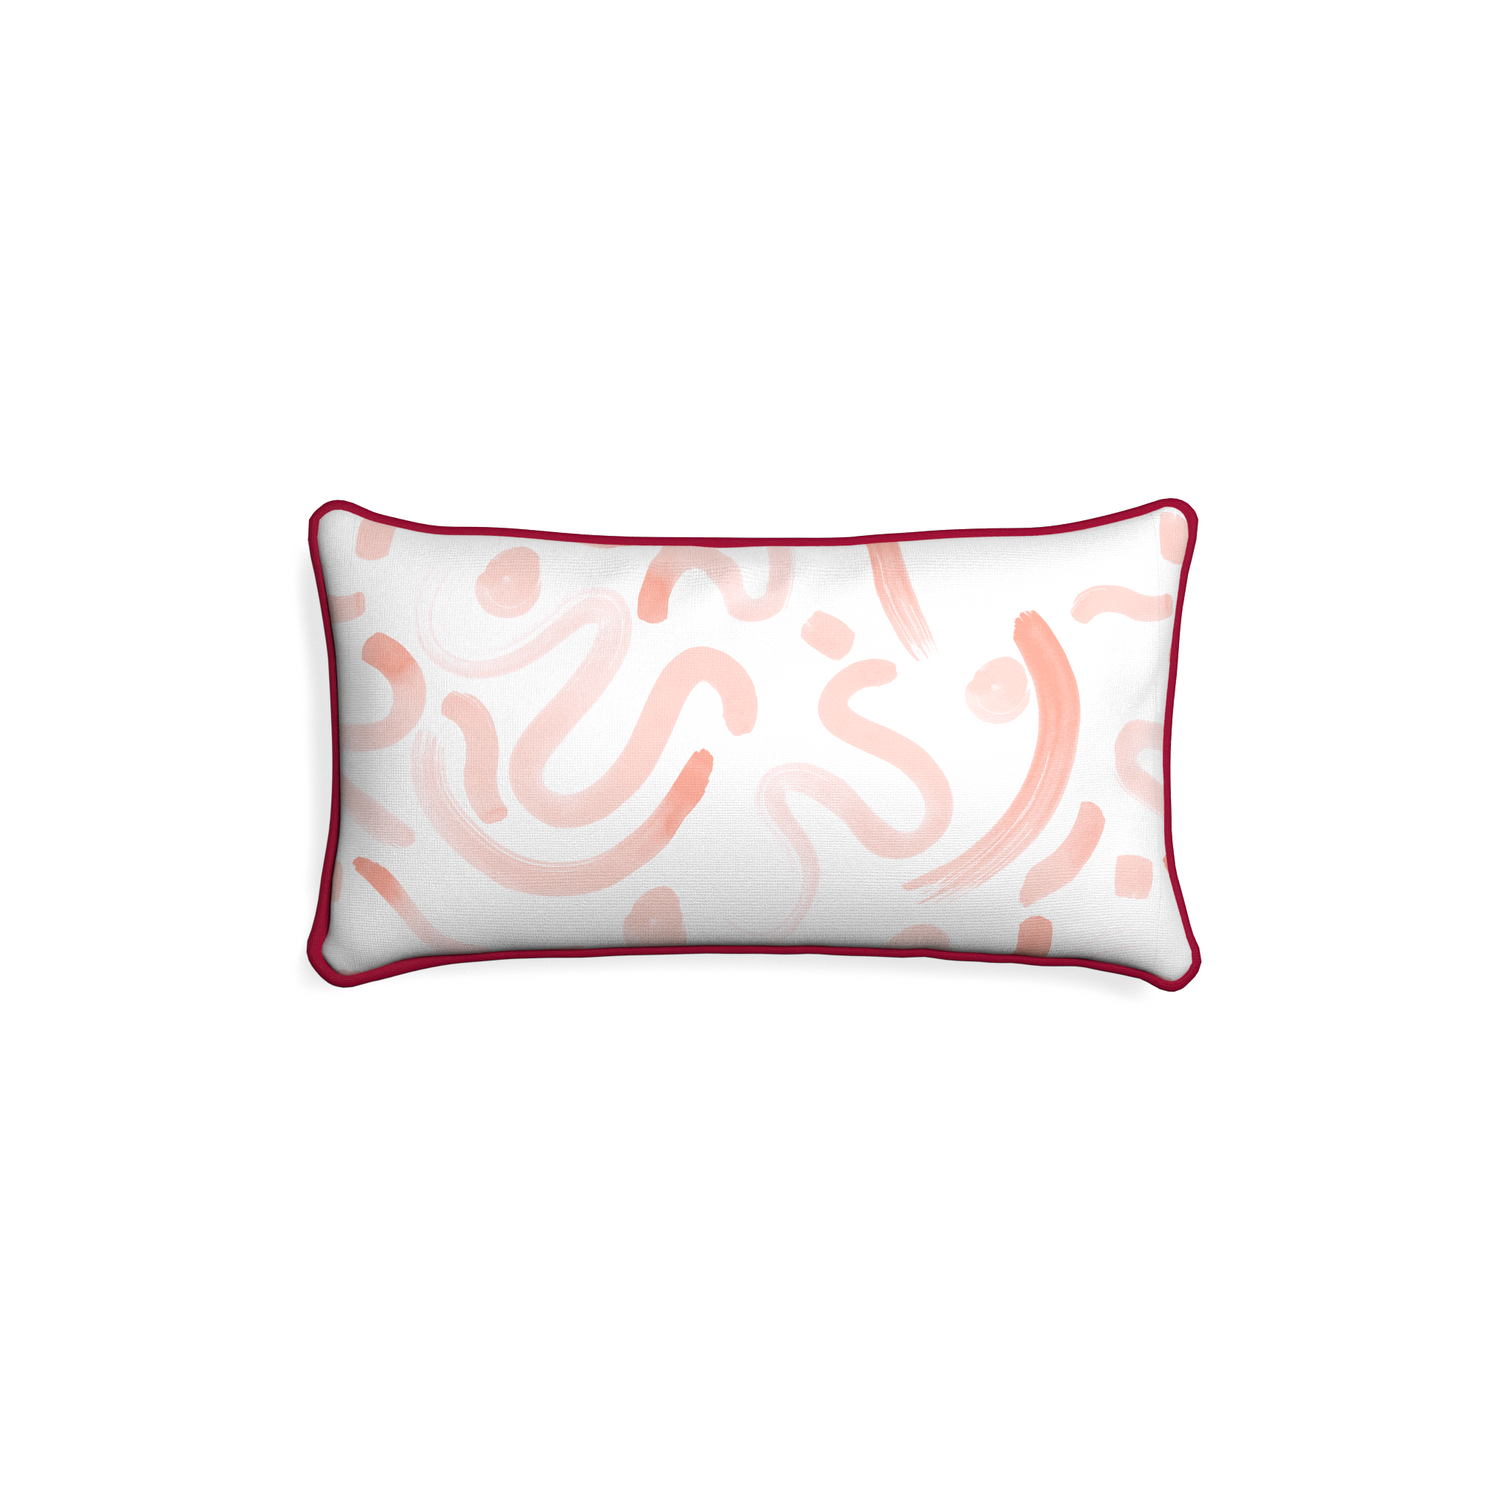 Petite-lumbar hockney pink custom pink graphicpillow with raspberry piping on white background